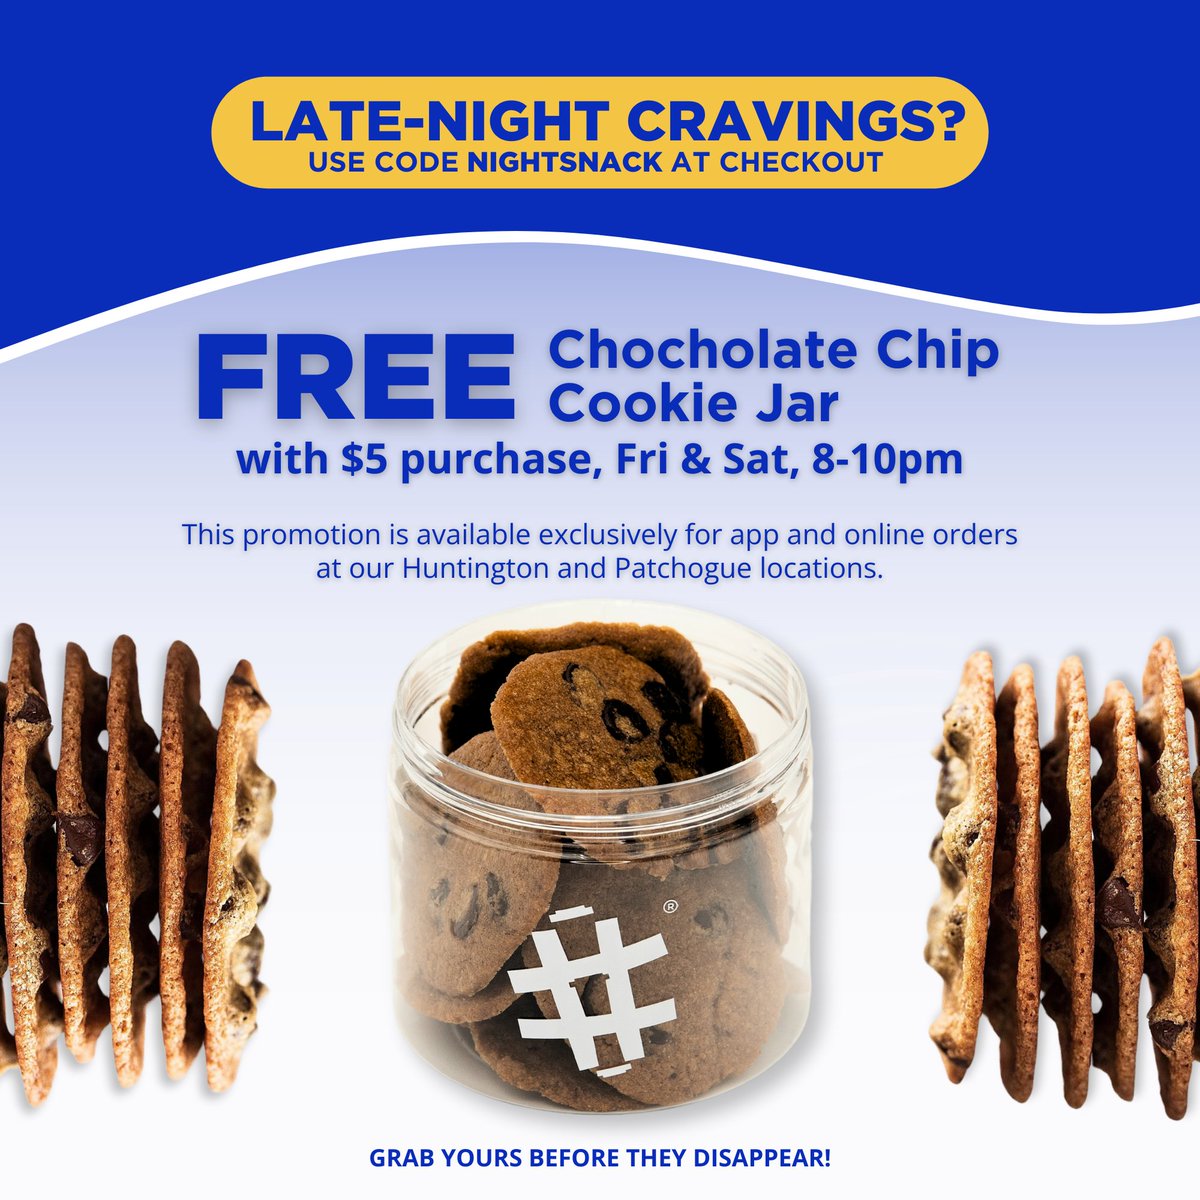 Late night cravings?  This offer is exclusive to app and online orders at our Huntington and Patchogue locations. Don't forget to use coupon code NIGHTSNACK at checkout. 

Swing by and make your nights sweeter! 

#YAAASTEA #cookiejar #cookies #longislandny